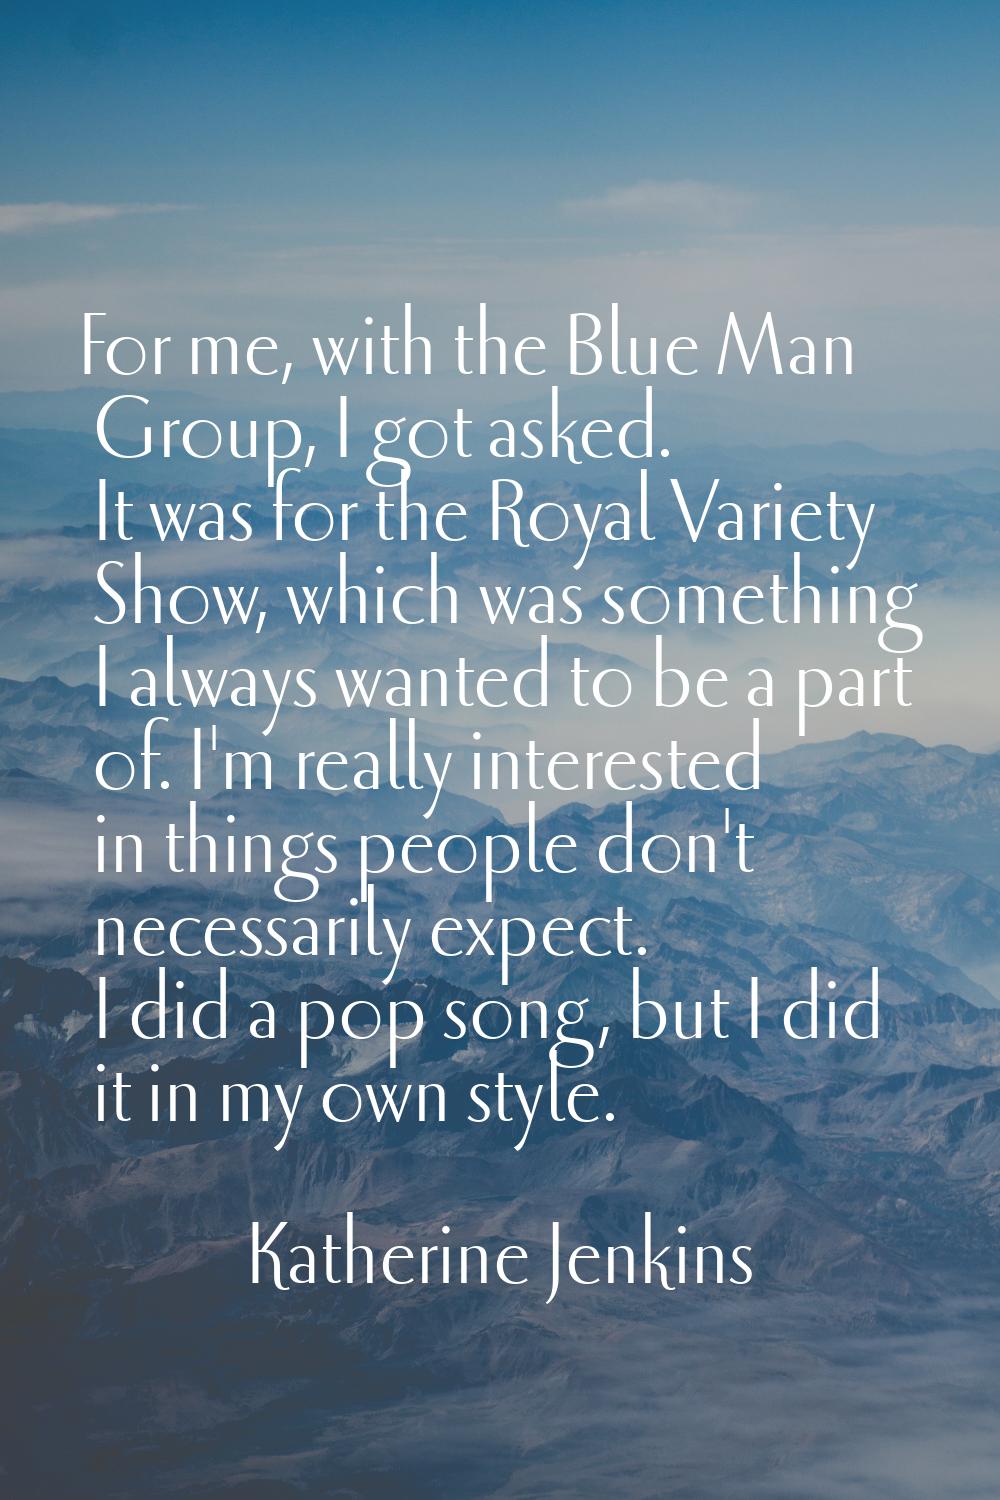 For me, with the Blue Man Group, I got asked. It was for the Royal Variety Show, which was somethin